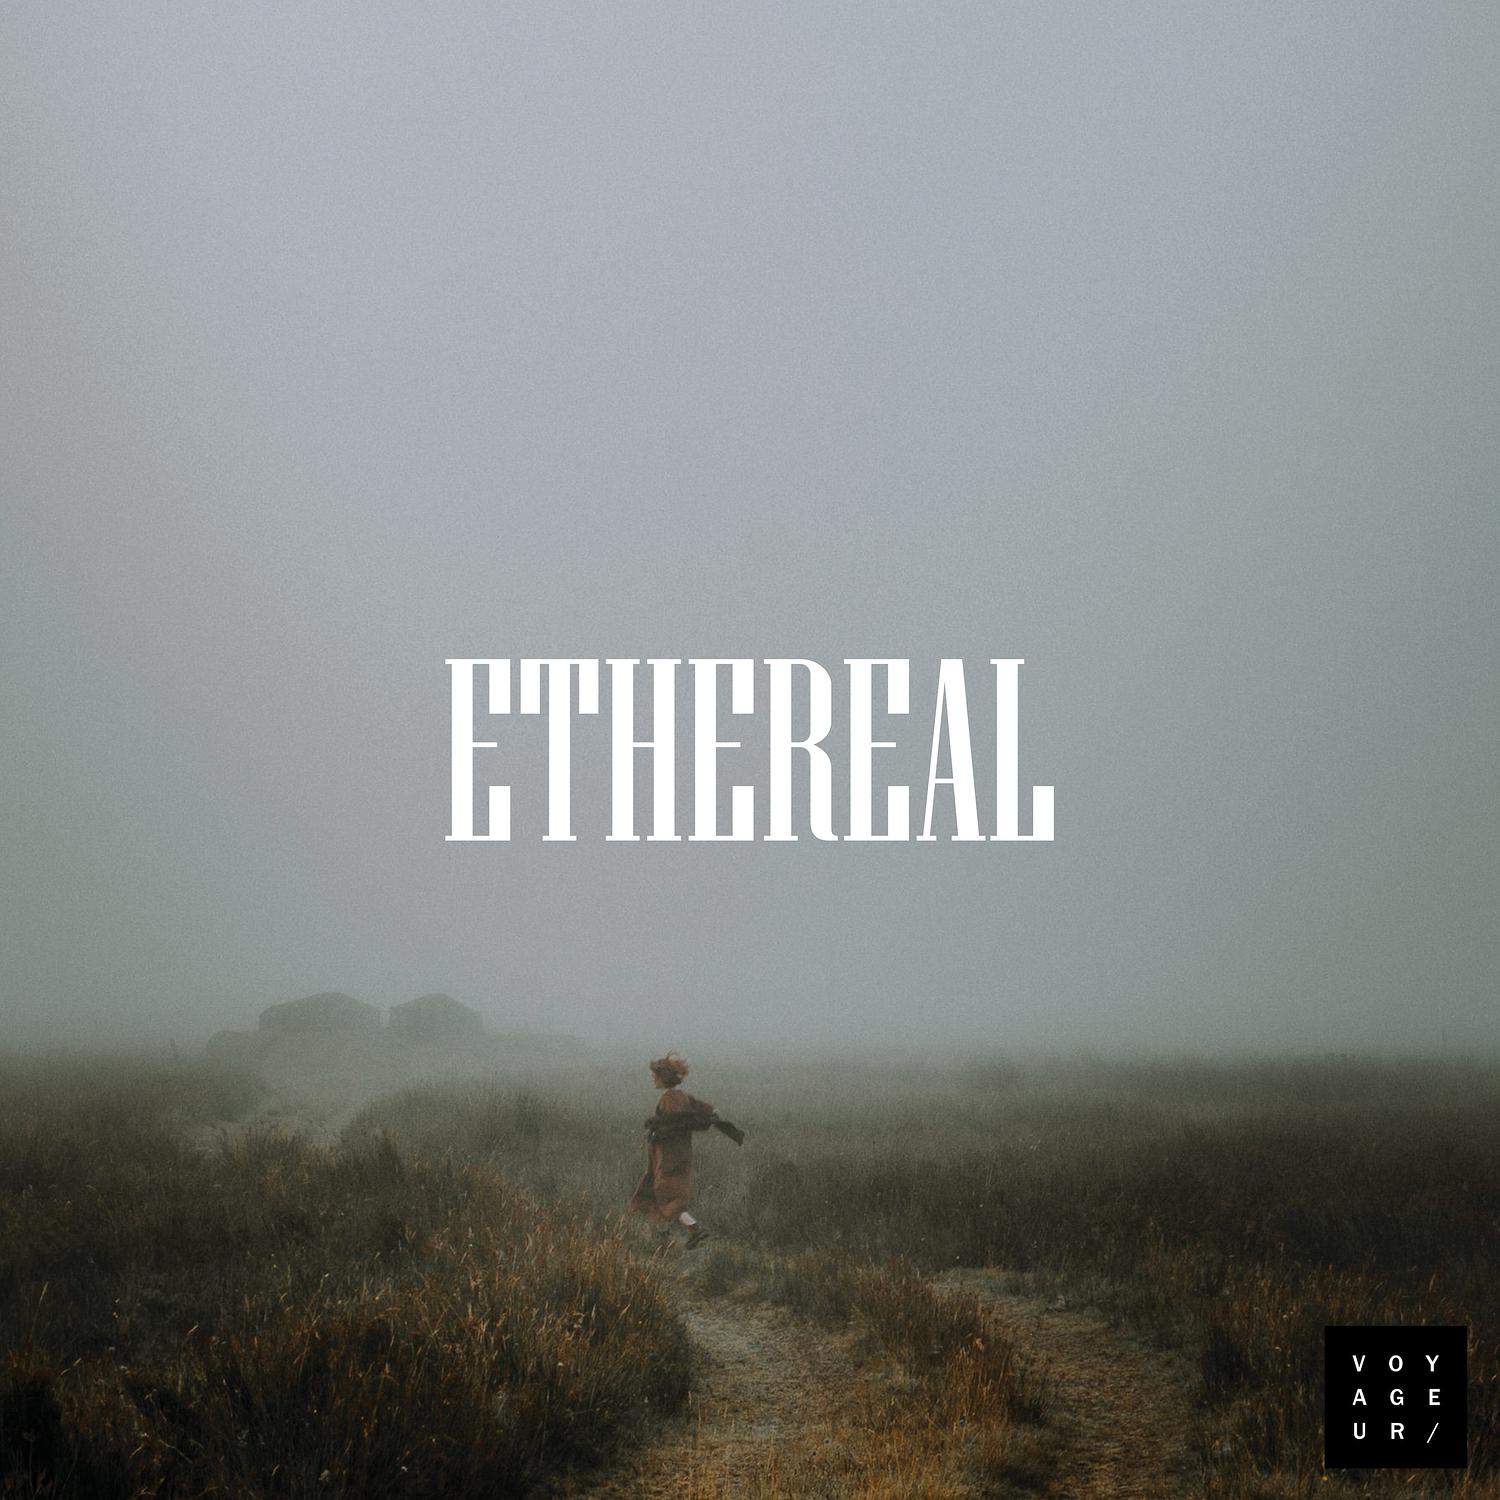 Ethereal歌词 歌手Voyageur-专辑Ethereal-单曲《Ethereal》LRC歌词下载